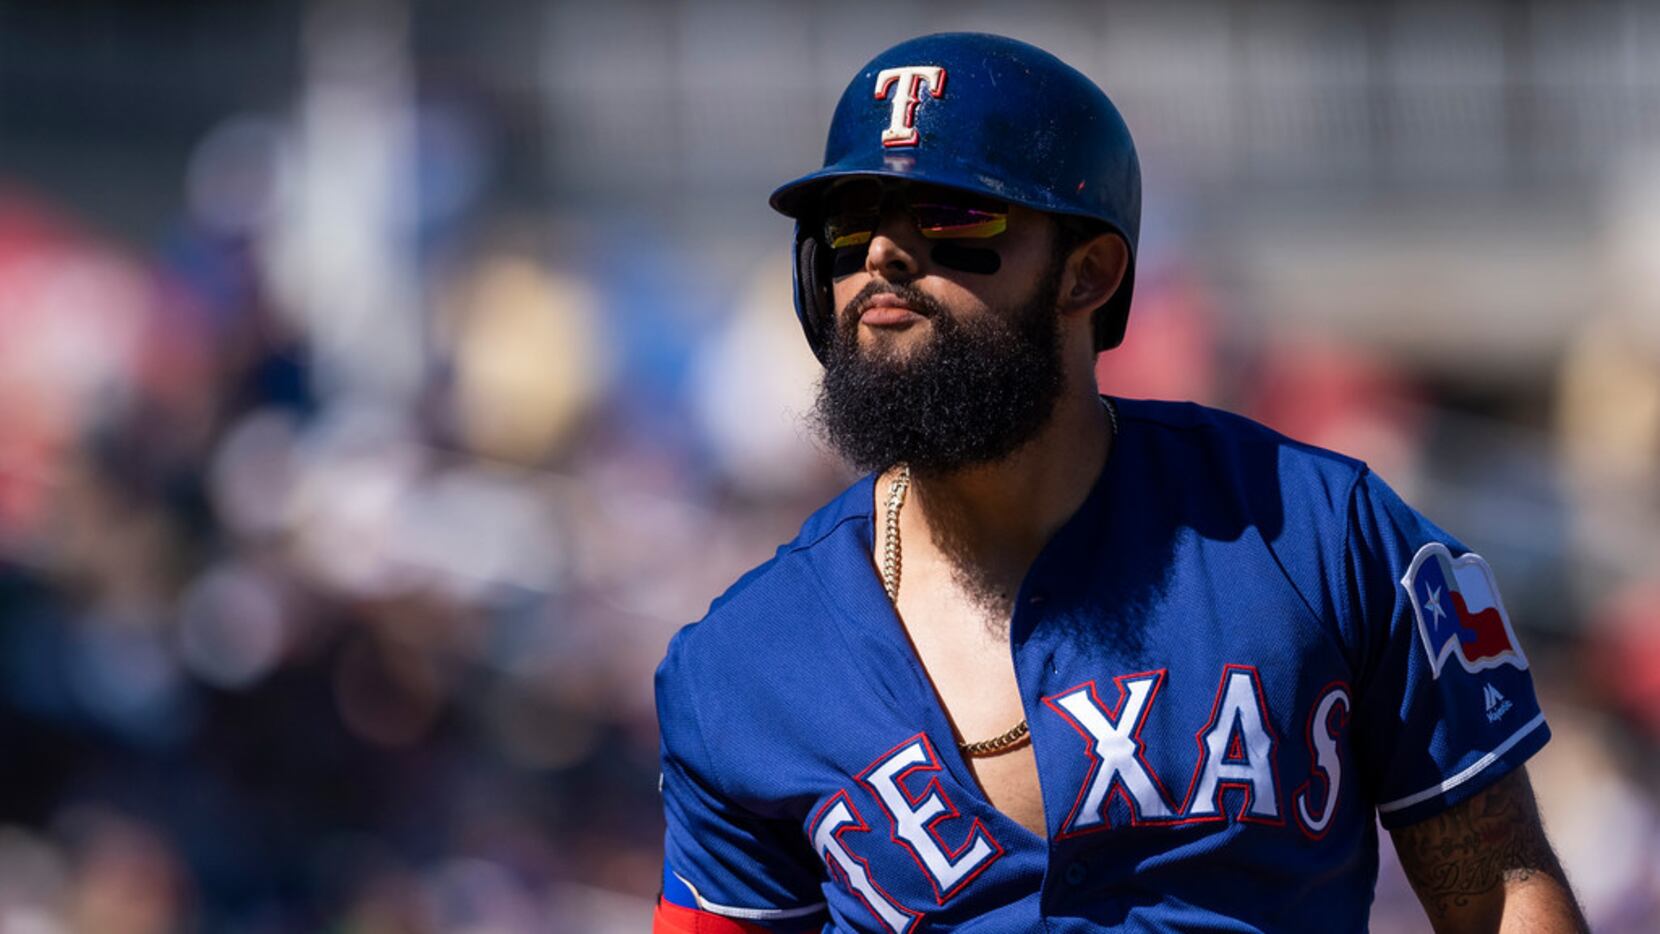 Why Rangers manager Chris Woodward says he was 'proud' of Rougned Odor even  before his recent turnaround